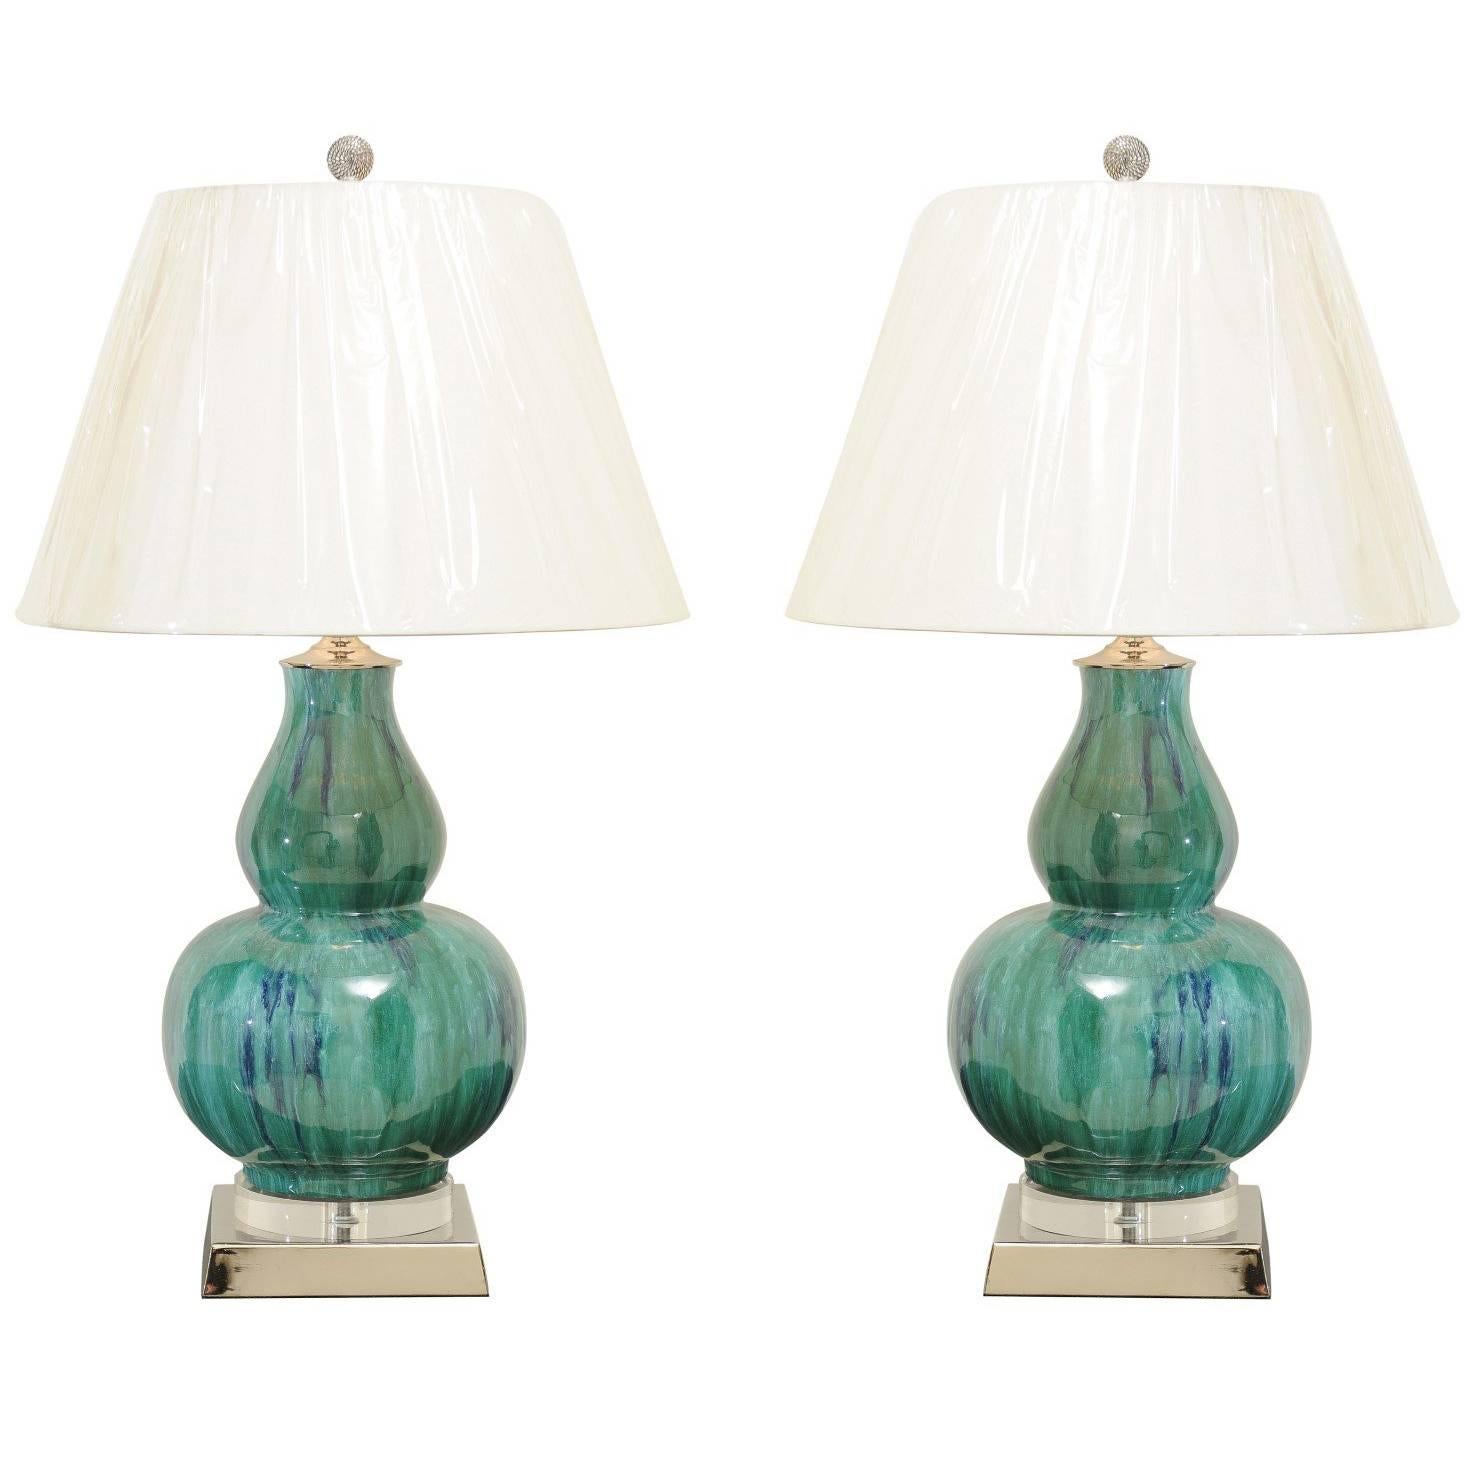 Fantastic Pair of Drip Glaze Gourd Lamps in Turquoise, Teal and Cobalt